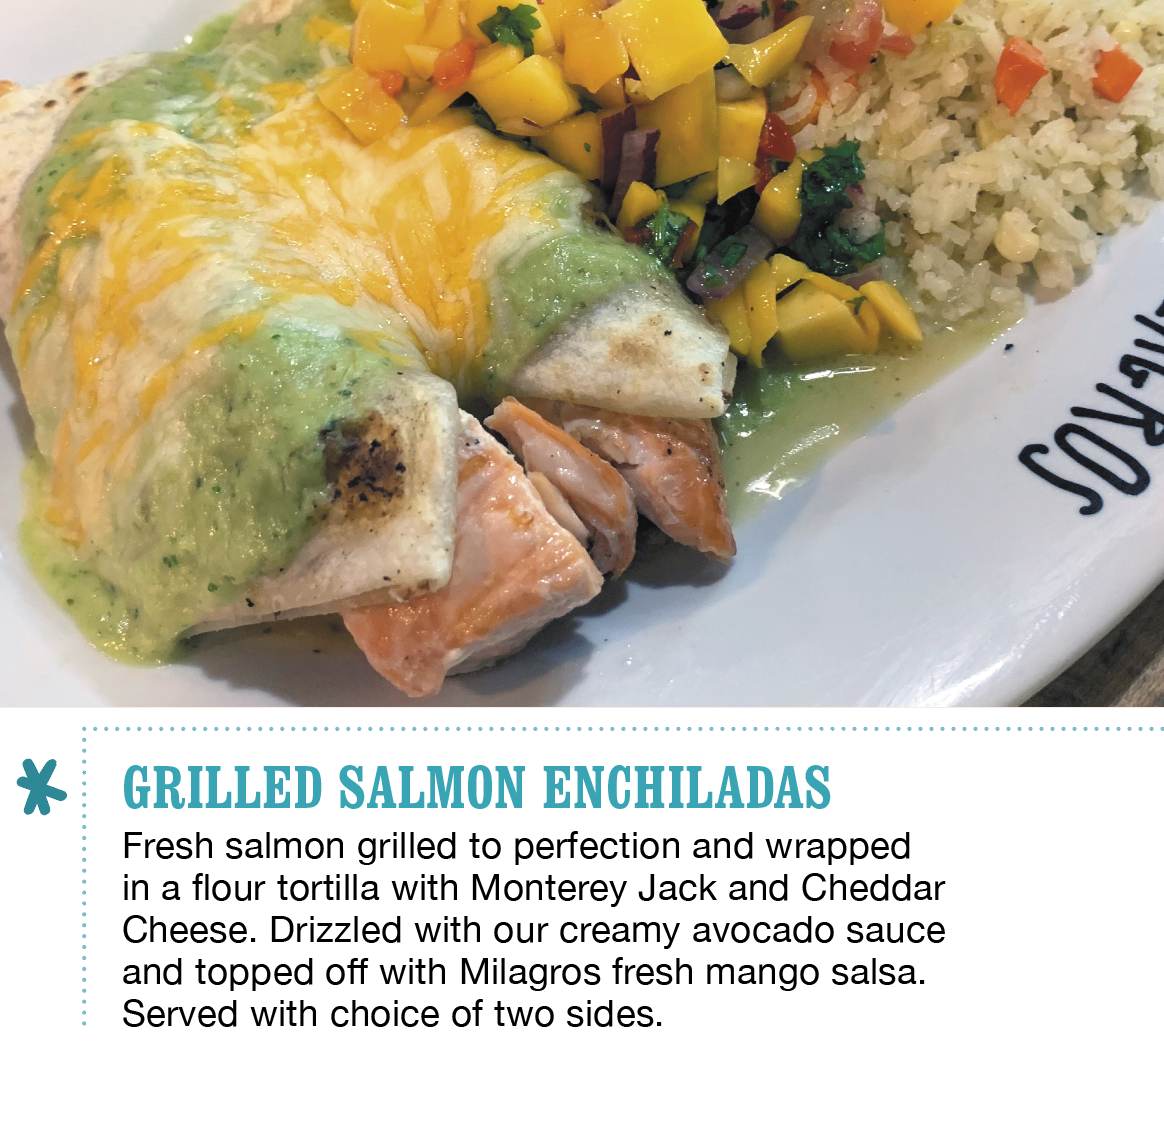 Try the incredible grilled salmon enchiladas at Milagros best mexican